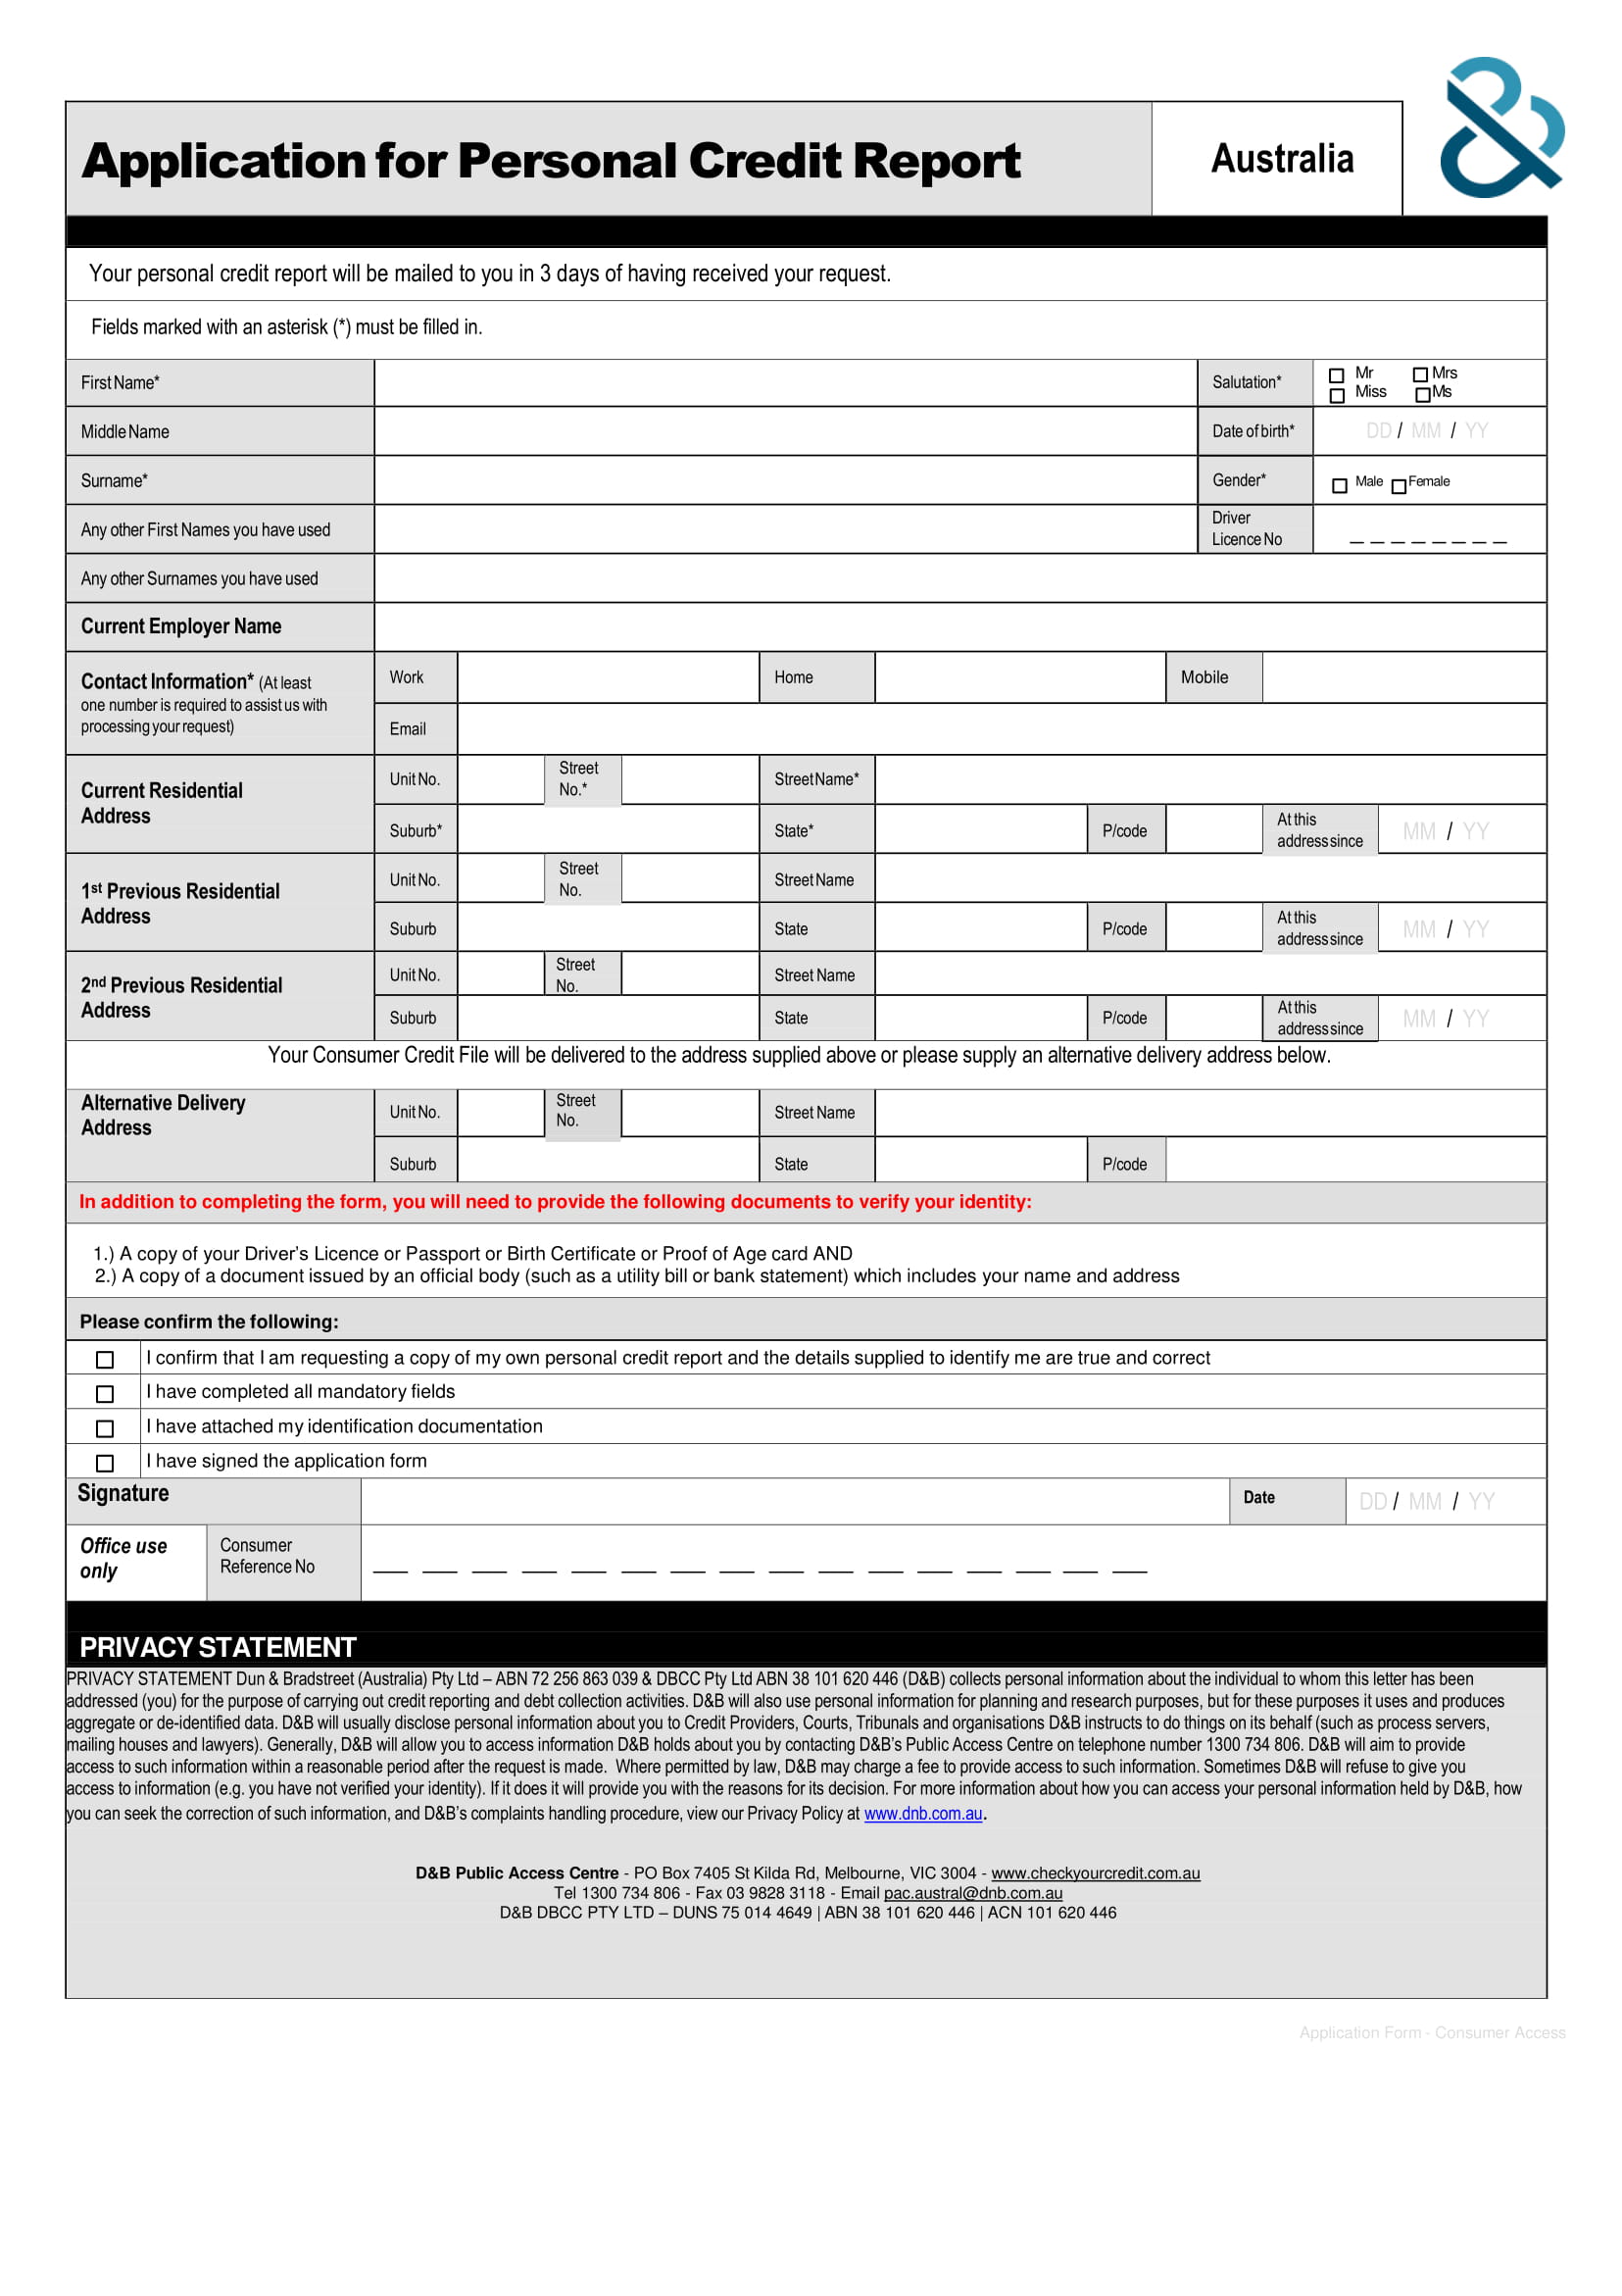 application for personal credit report form 1